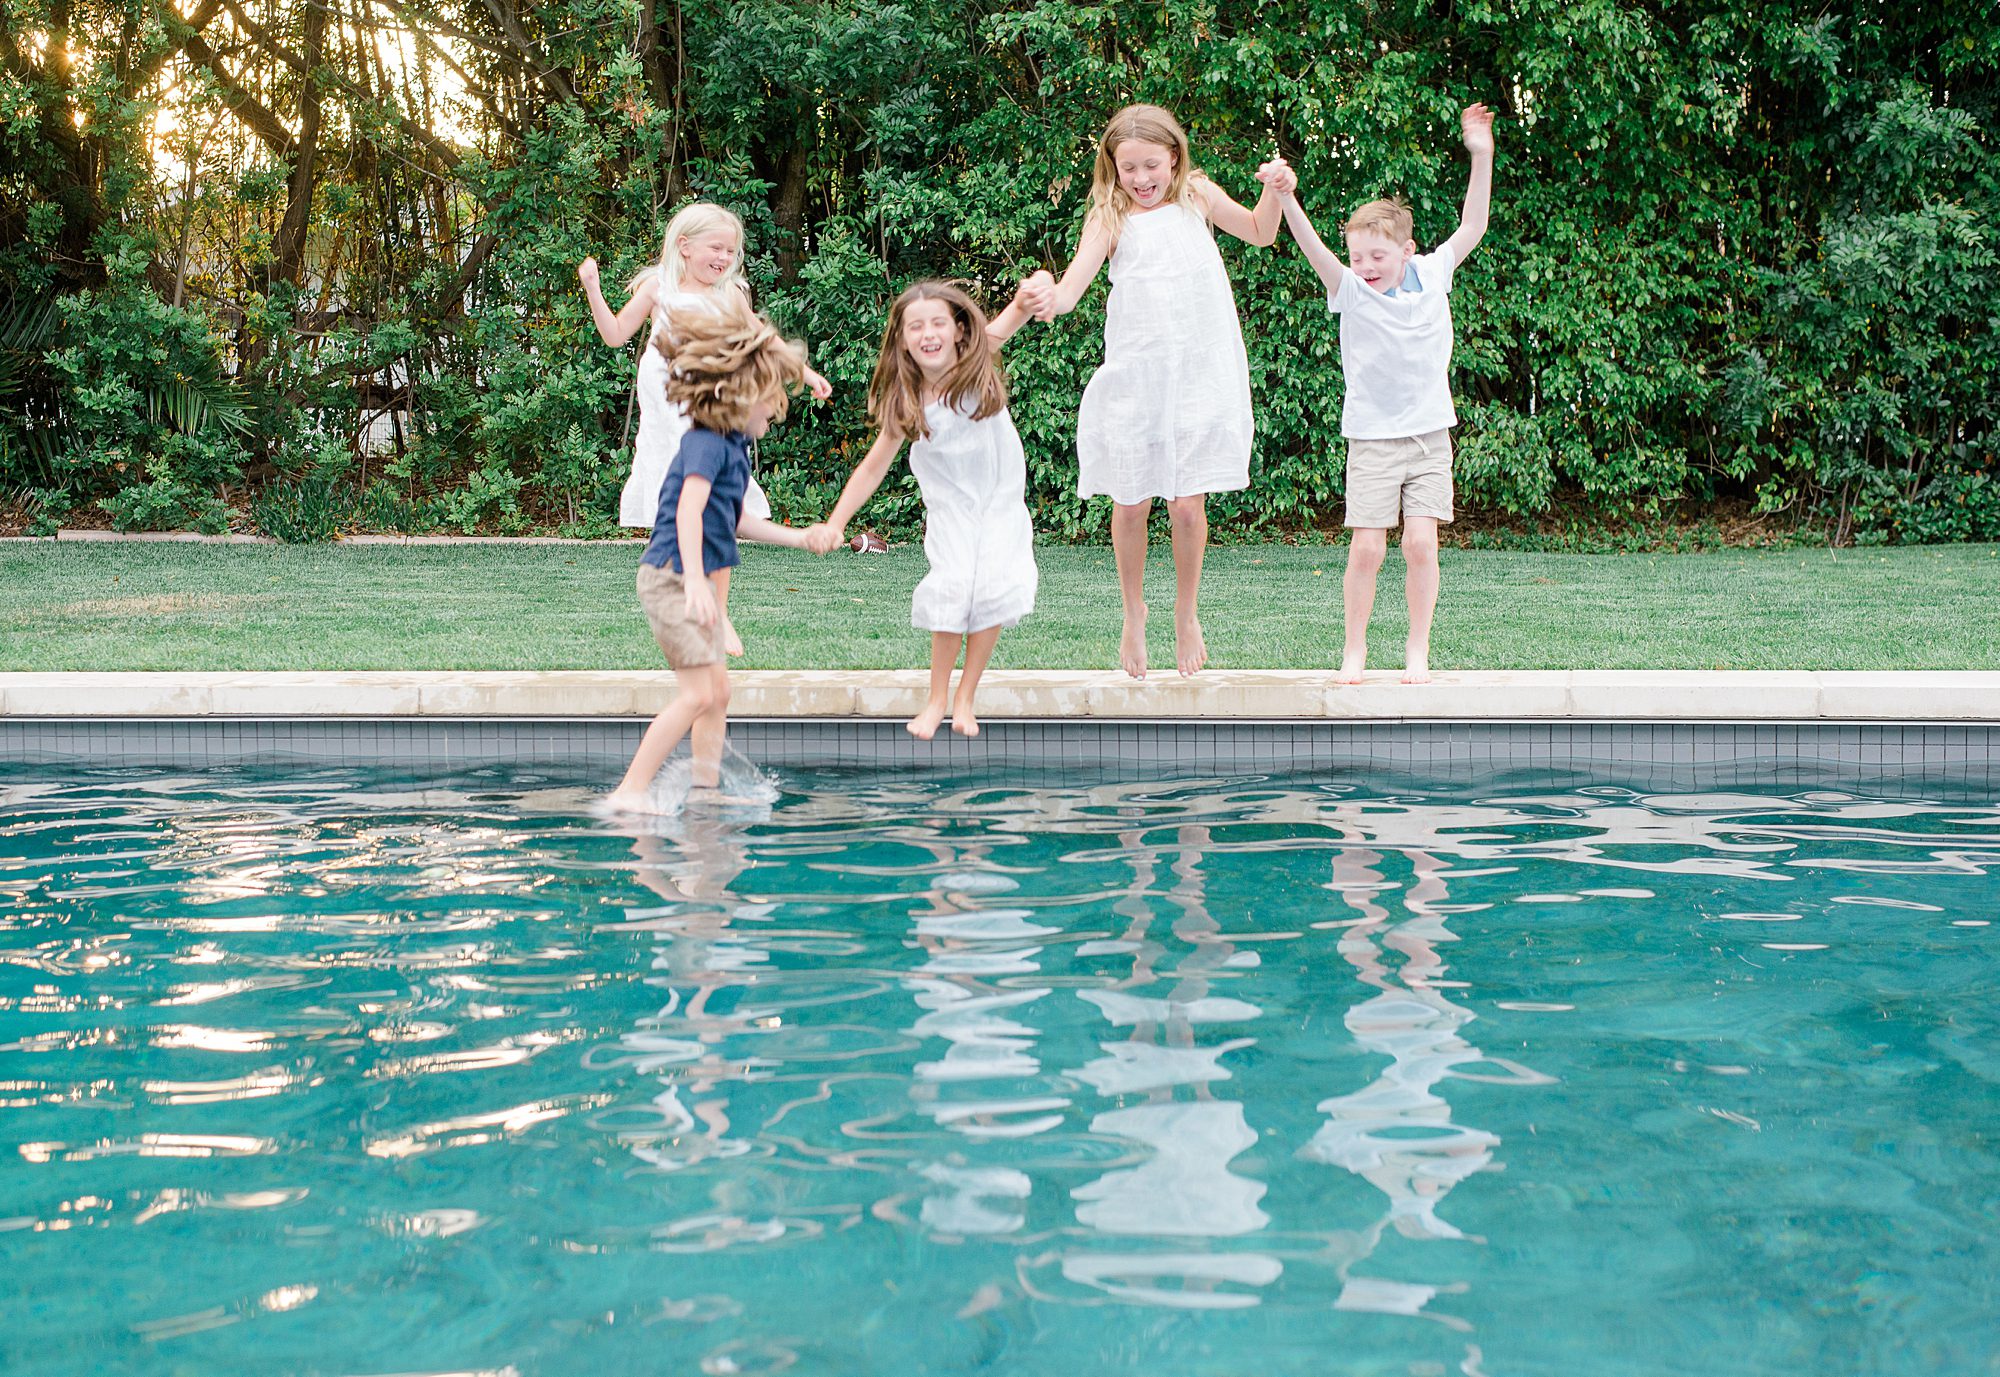 San Diego family photographer captures cousins jumping in the pool